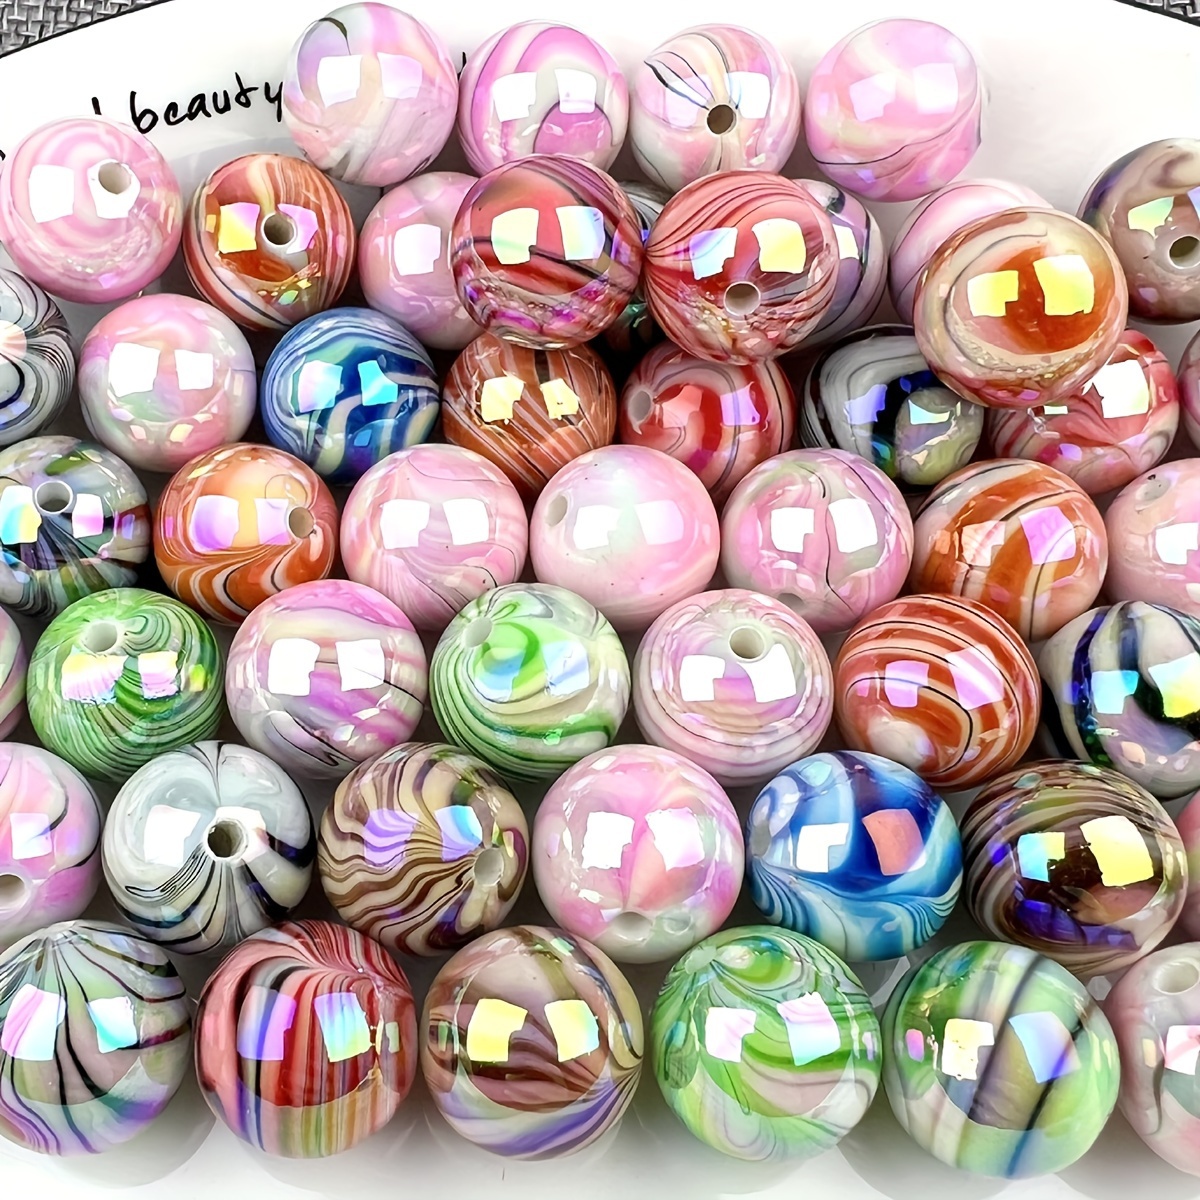 10mm Round Acrylic Beads - Multicolor Candy Beads - For Jewelry Making C12